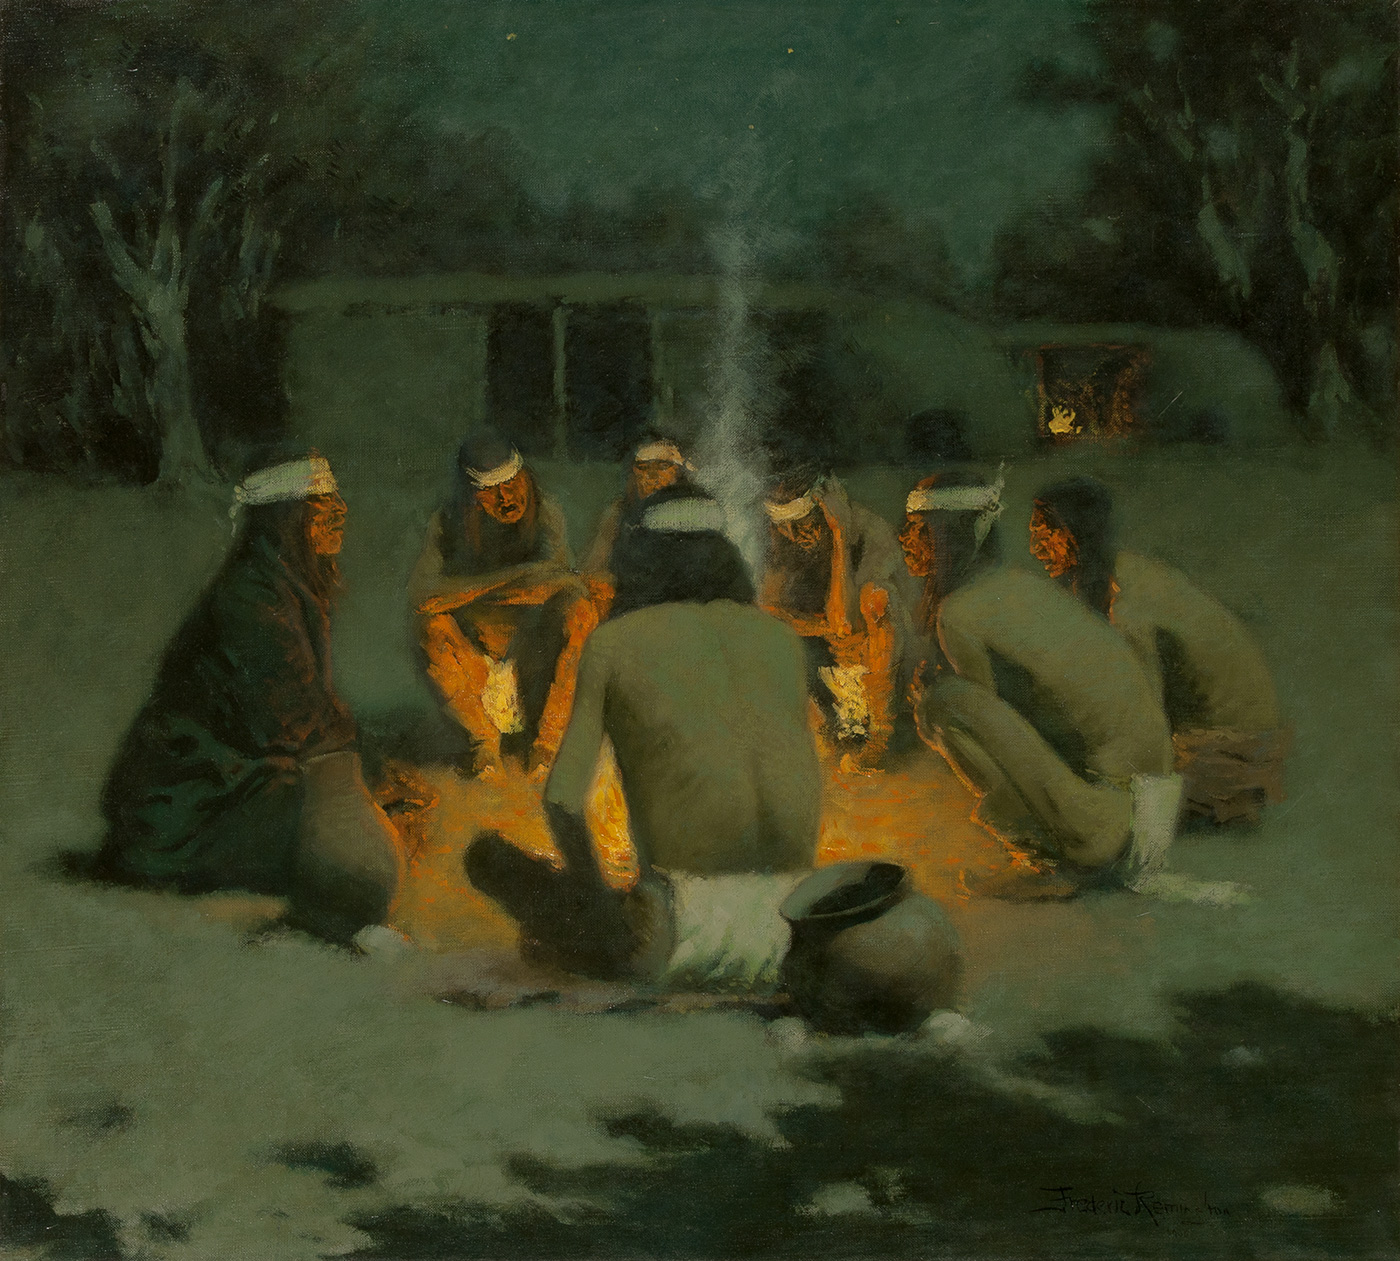 A group of Apache Indians gather closely around a campfire at night.